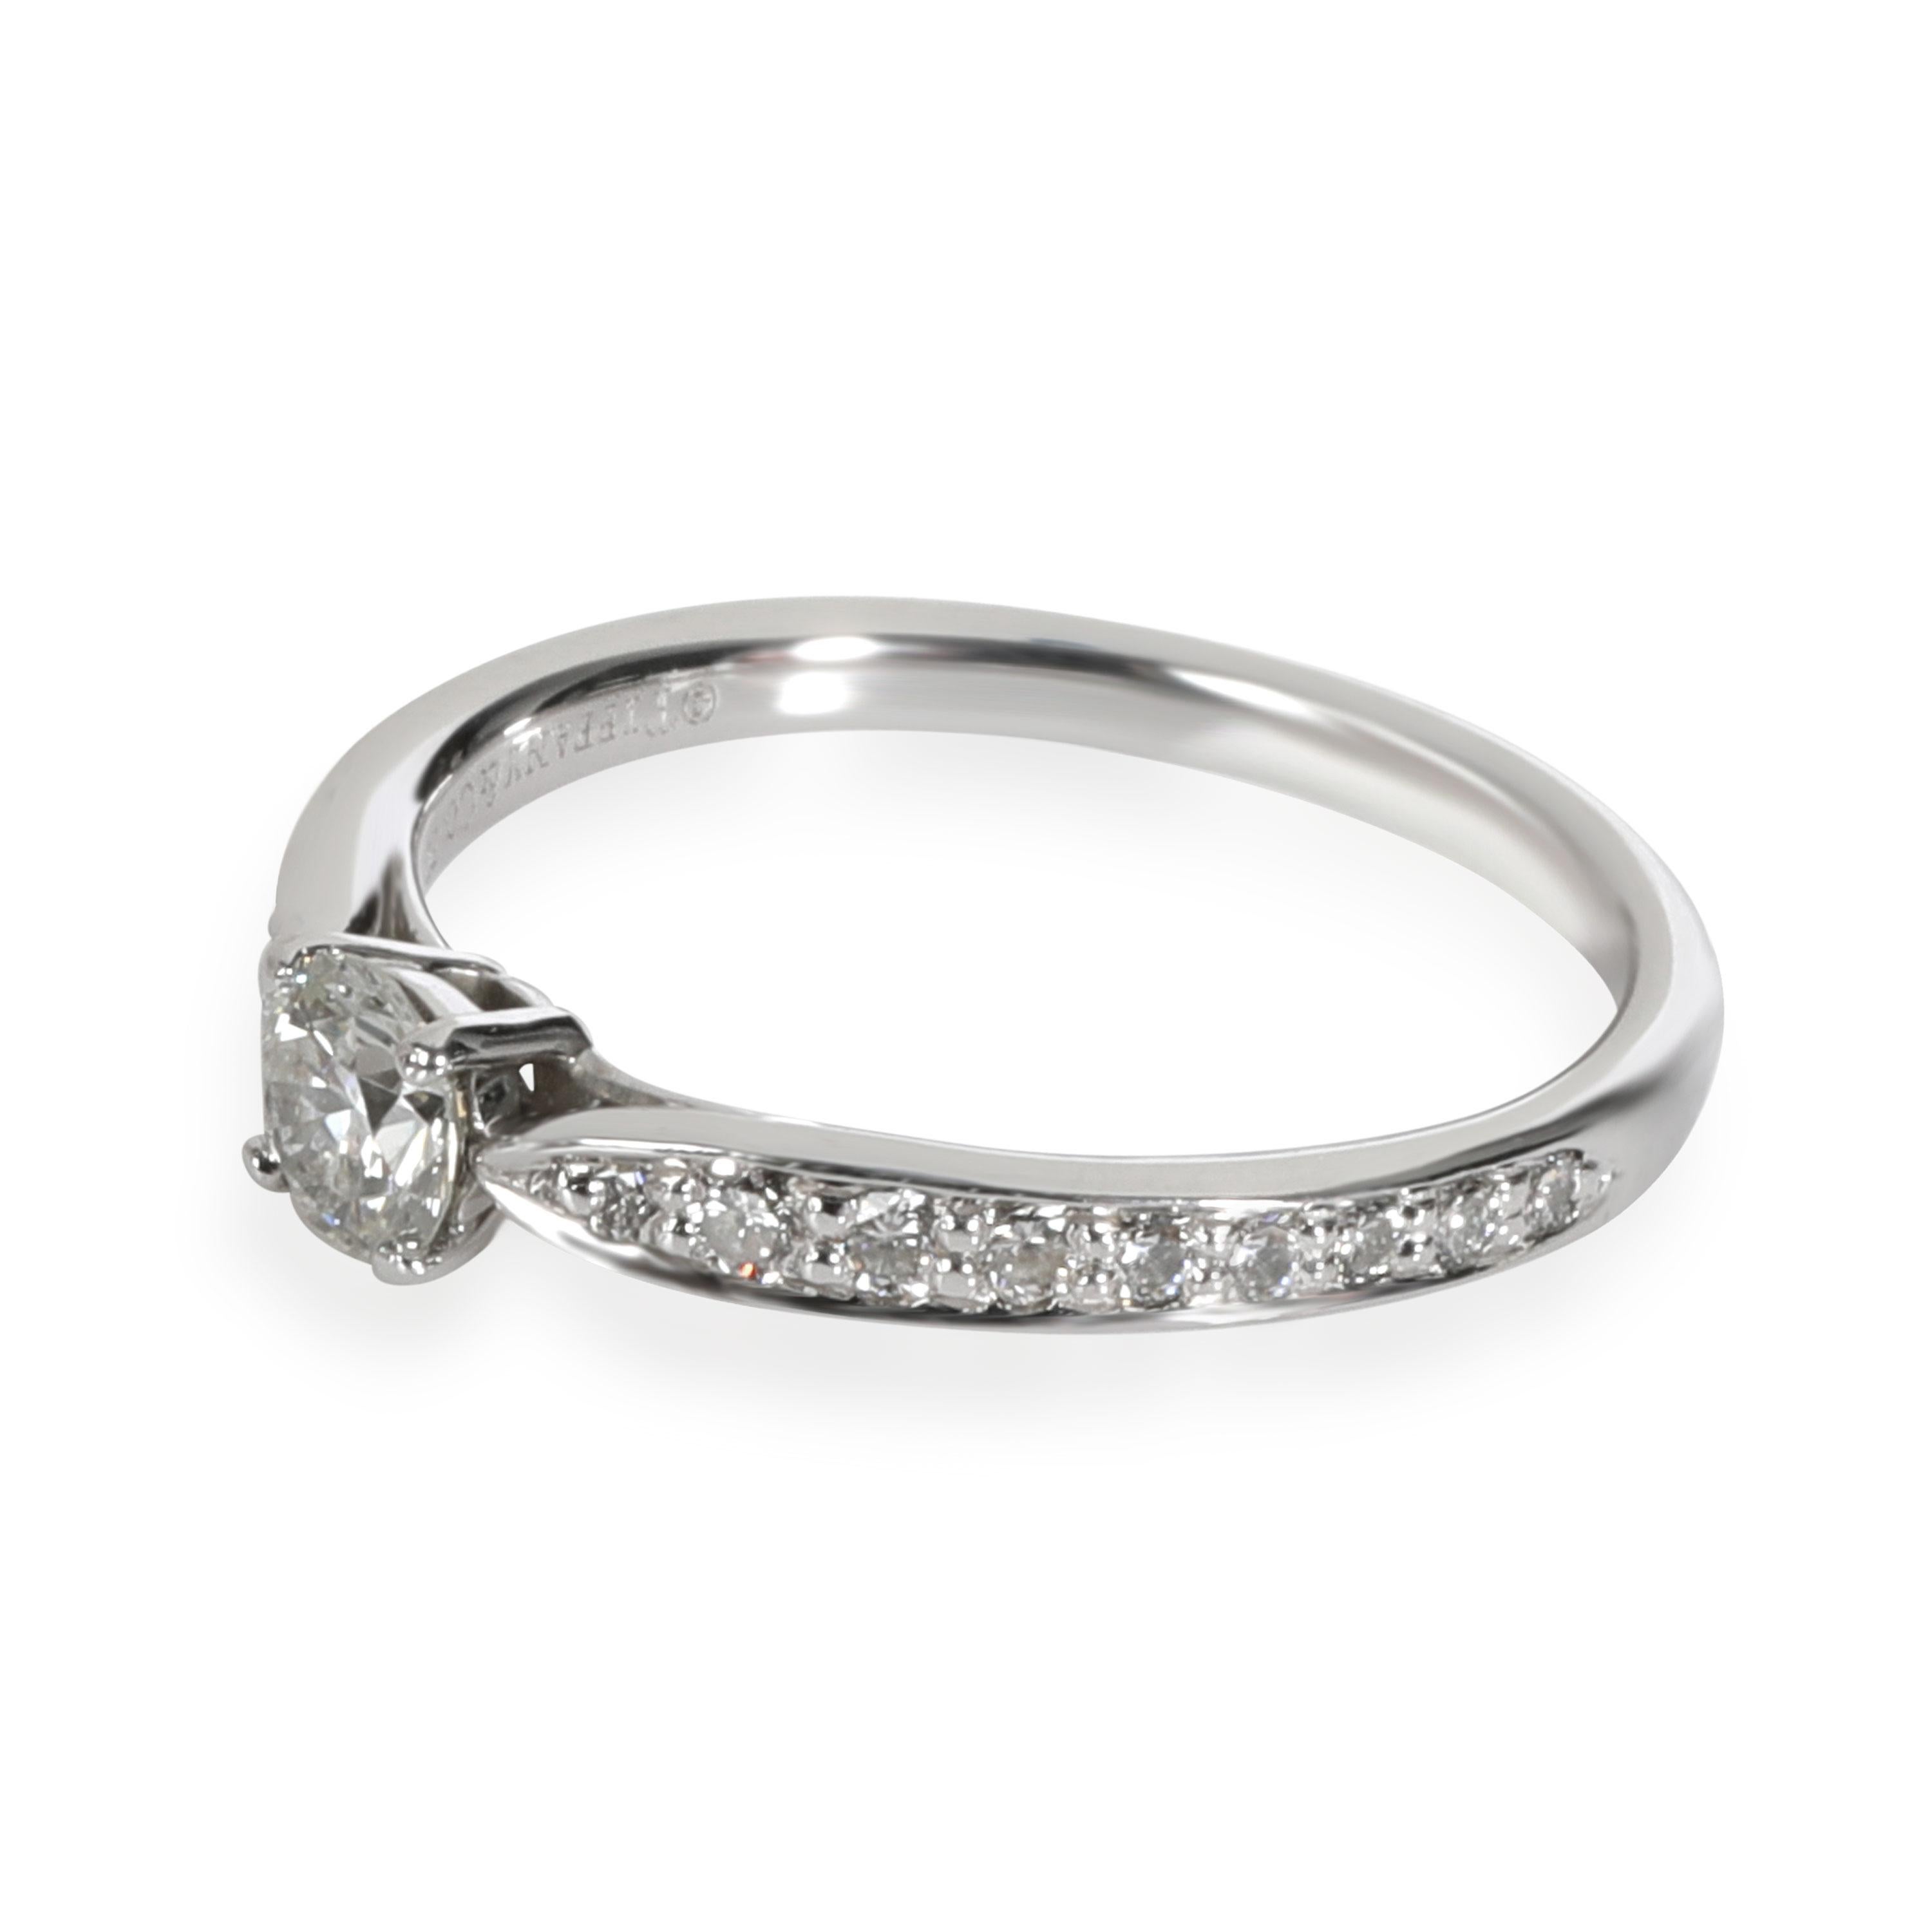 Tiffany & Co. Harmony Diamond Engagement Ring in Platinum I VVS2 0.40 CT

PRIMARY DETAILS
SKU: 110749
Listing Title: Tiffany & Co. Harmony Diamond Engagement Ring in Platinum I VVS2 0.40 CT
Condition Description: Retails for 3,050 USD. In excellent